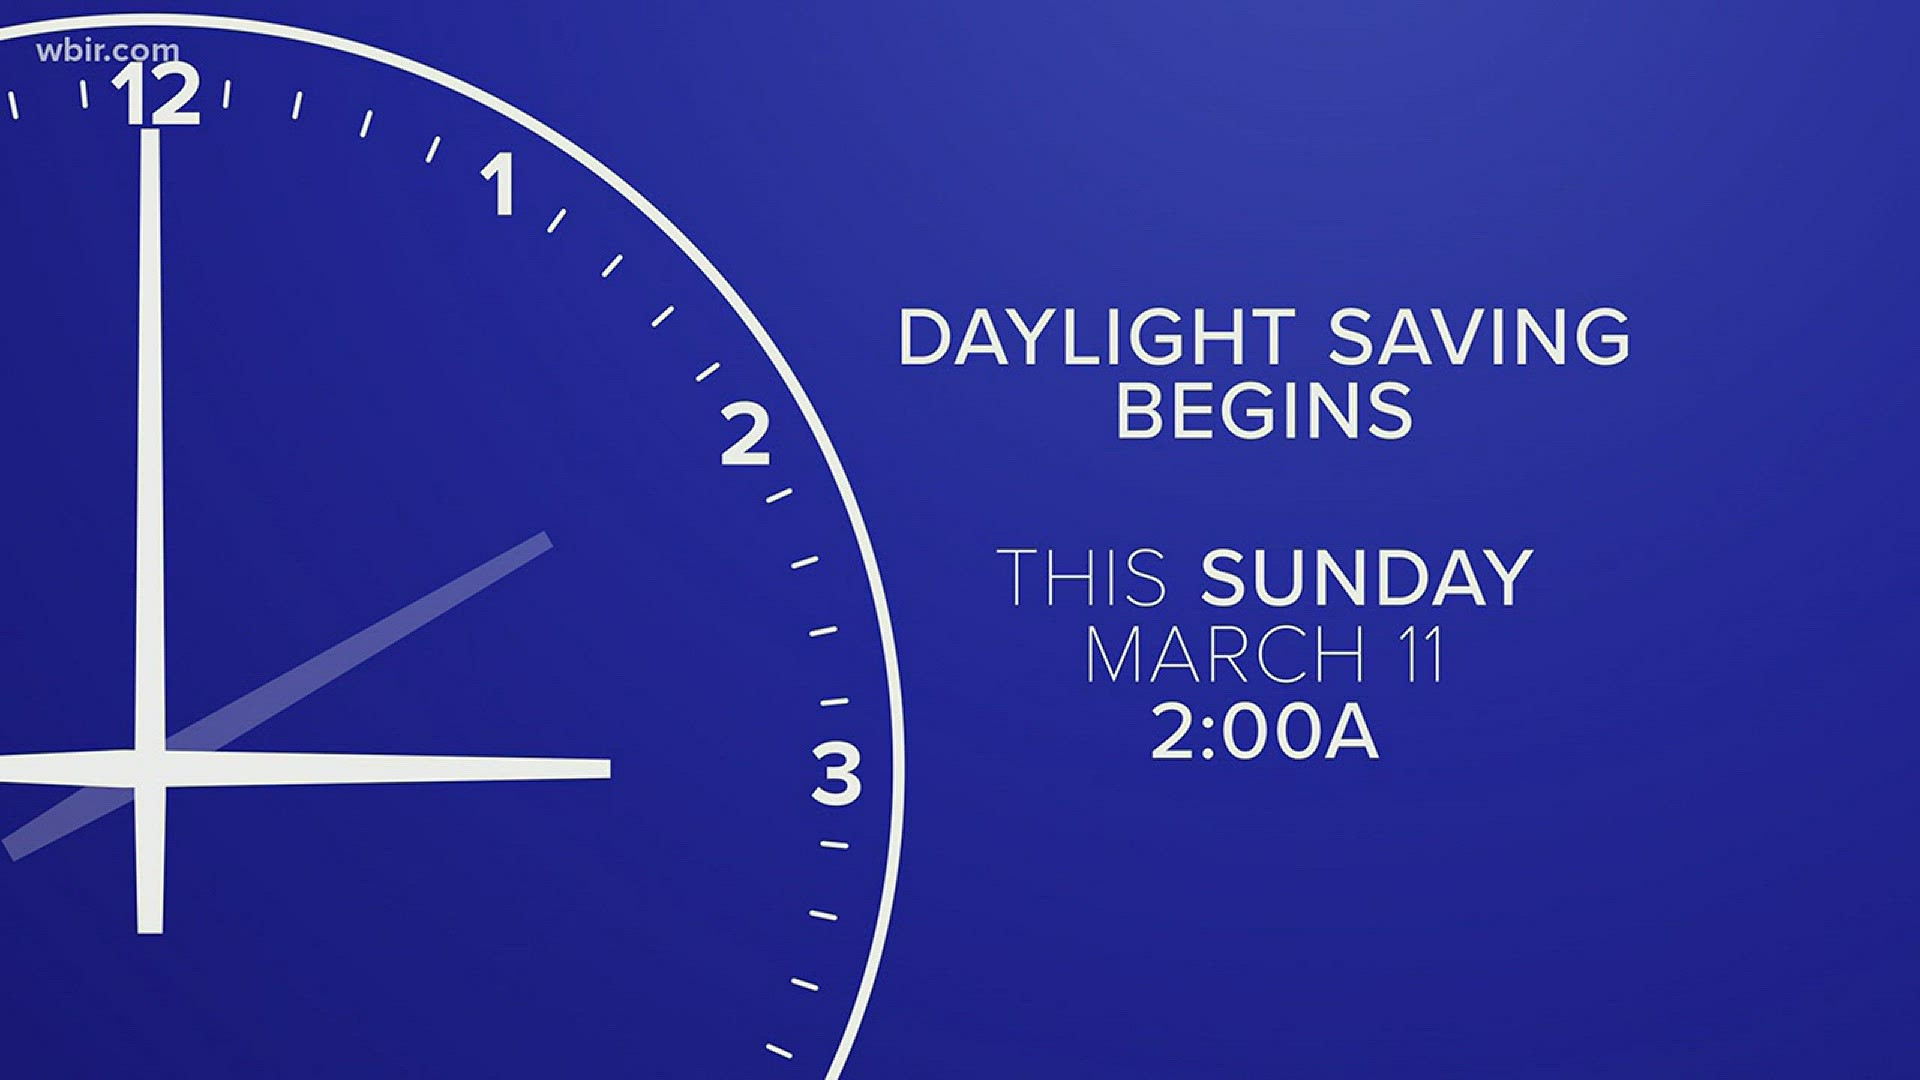 Turning the clock back one hour: We see more sun, but we get less sleep.